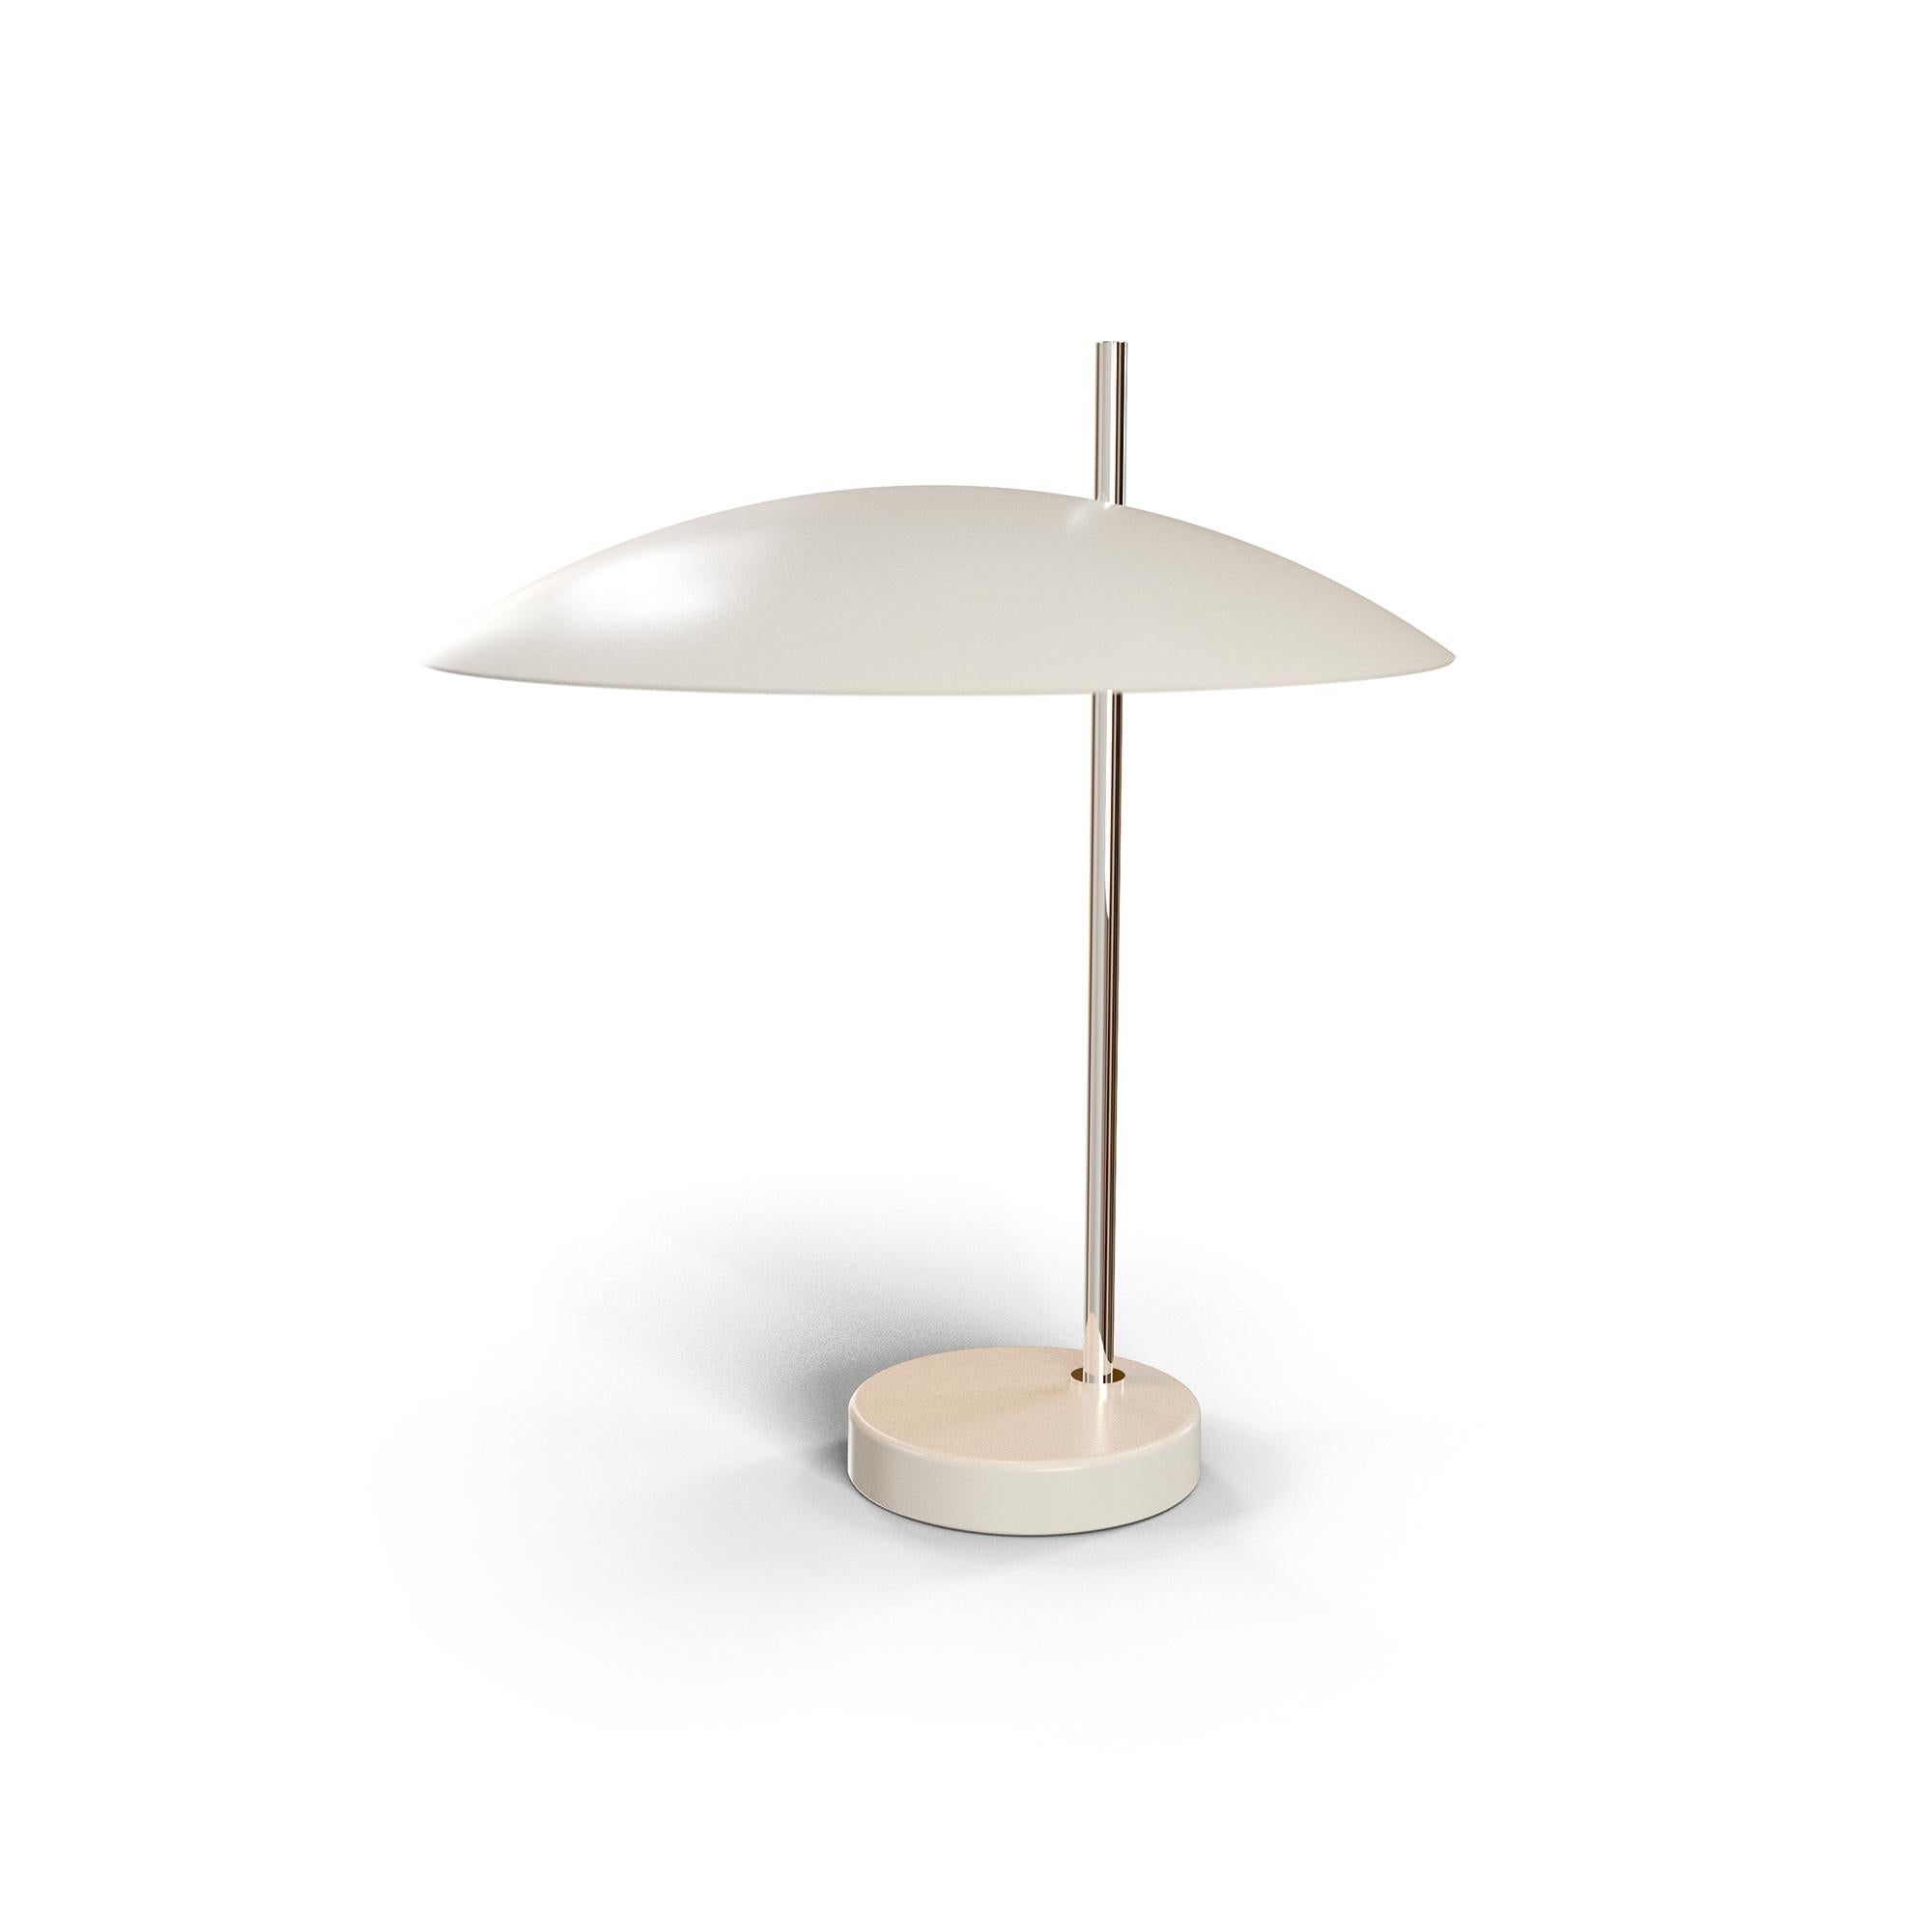 Chrome 1013 Table Lamp by Disderot
Limited Edition. 
Designed by Pierre Disderot.
Dimensions: Ø 34,1 x H 39,77 cm.
Materials: Chrome and white metal.

Delivered with authentication certificate. Made in France. Available in brushed brass, golden